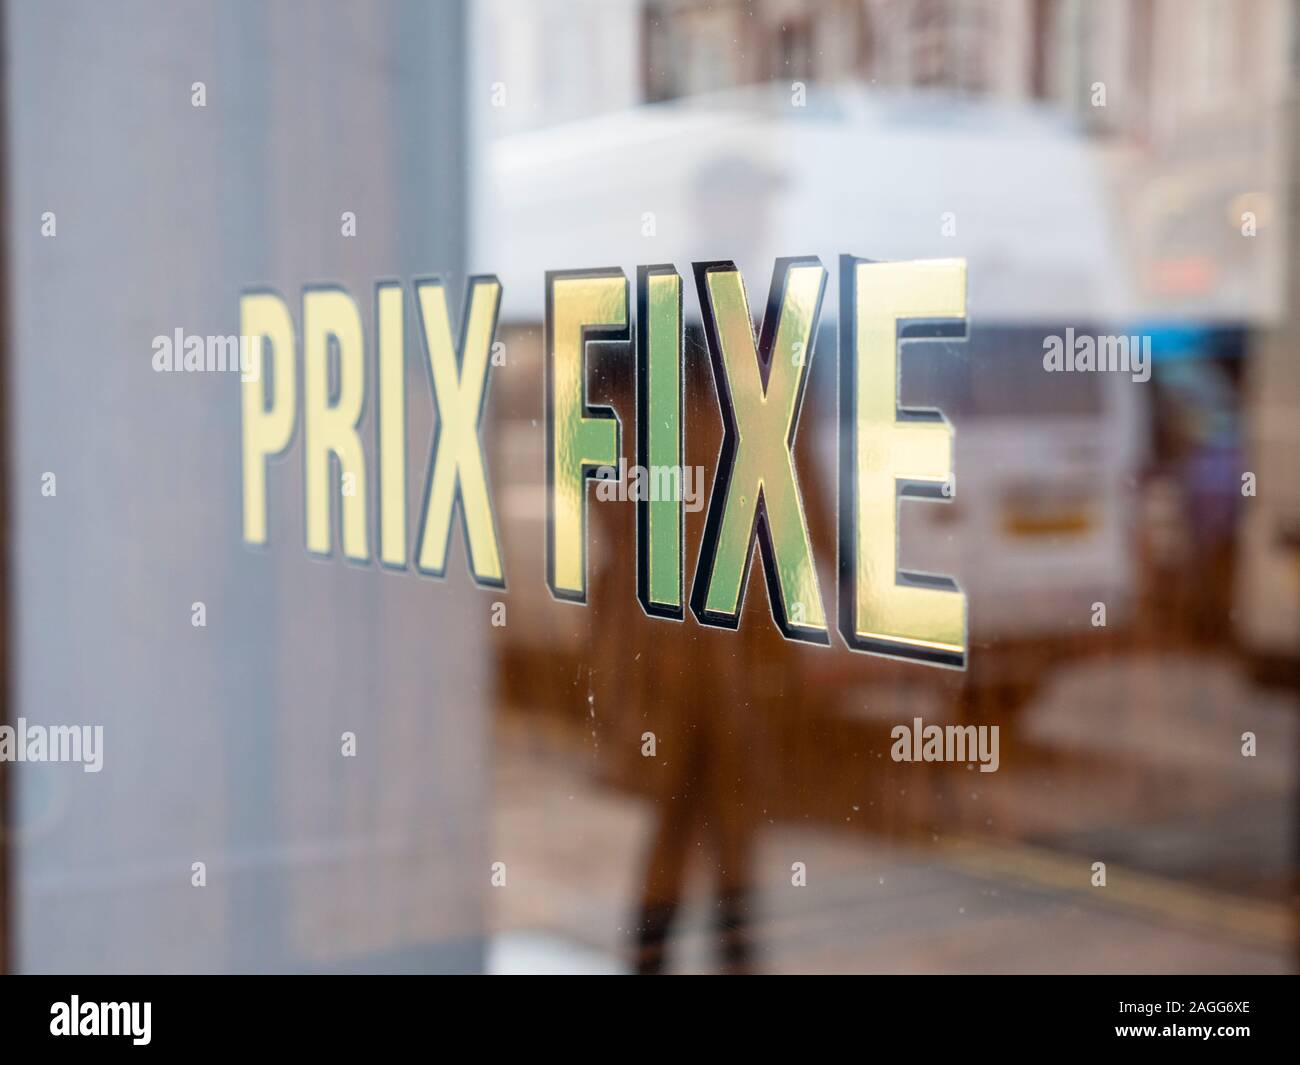 Prix fixe or fixed price adverts for food in a restaurant window in gold lettering on the window Stock Photo